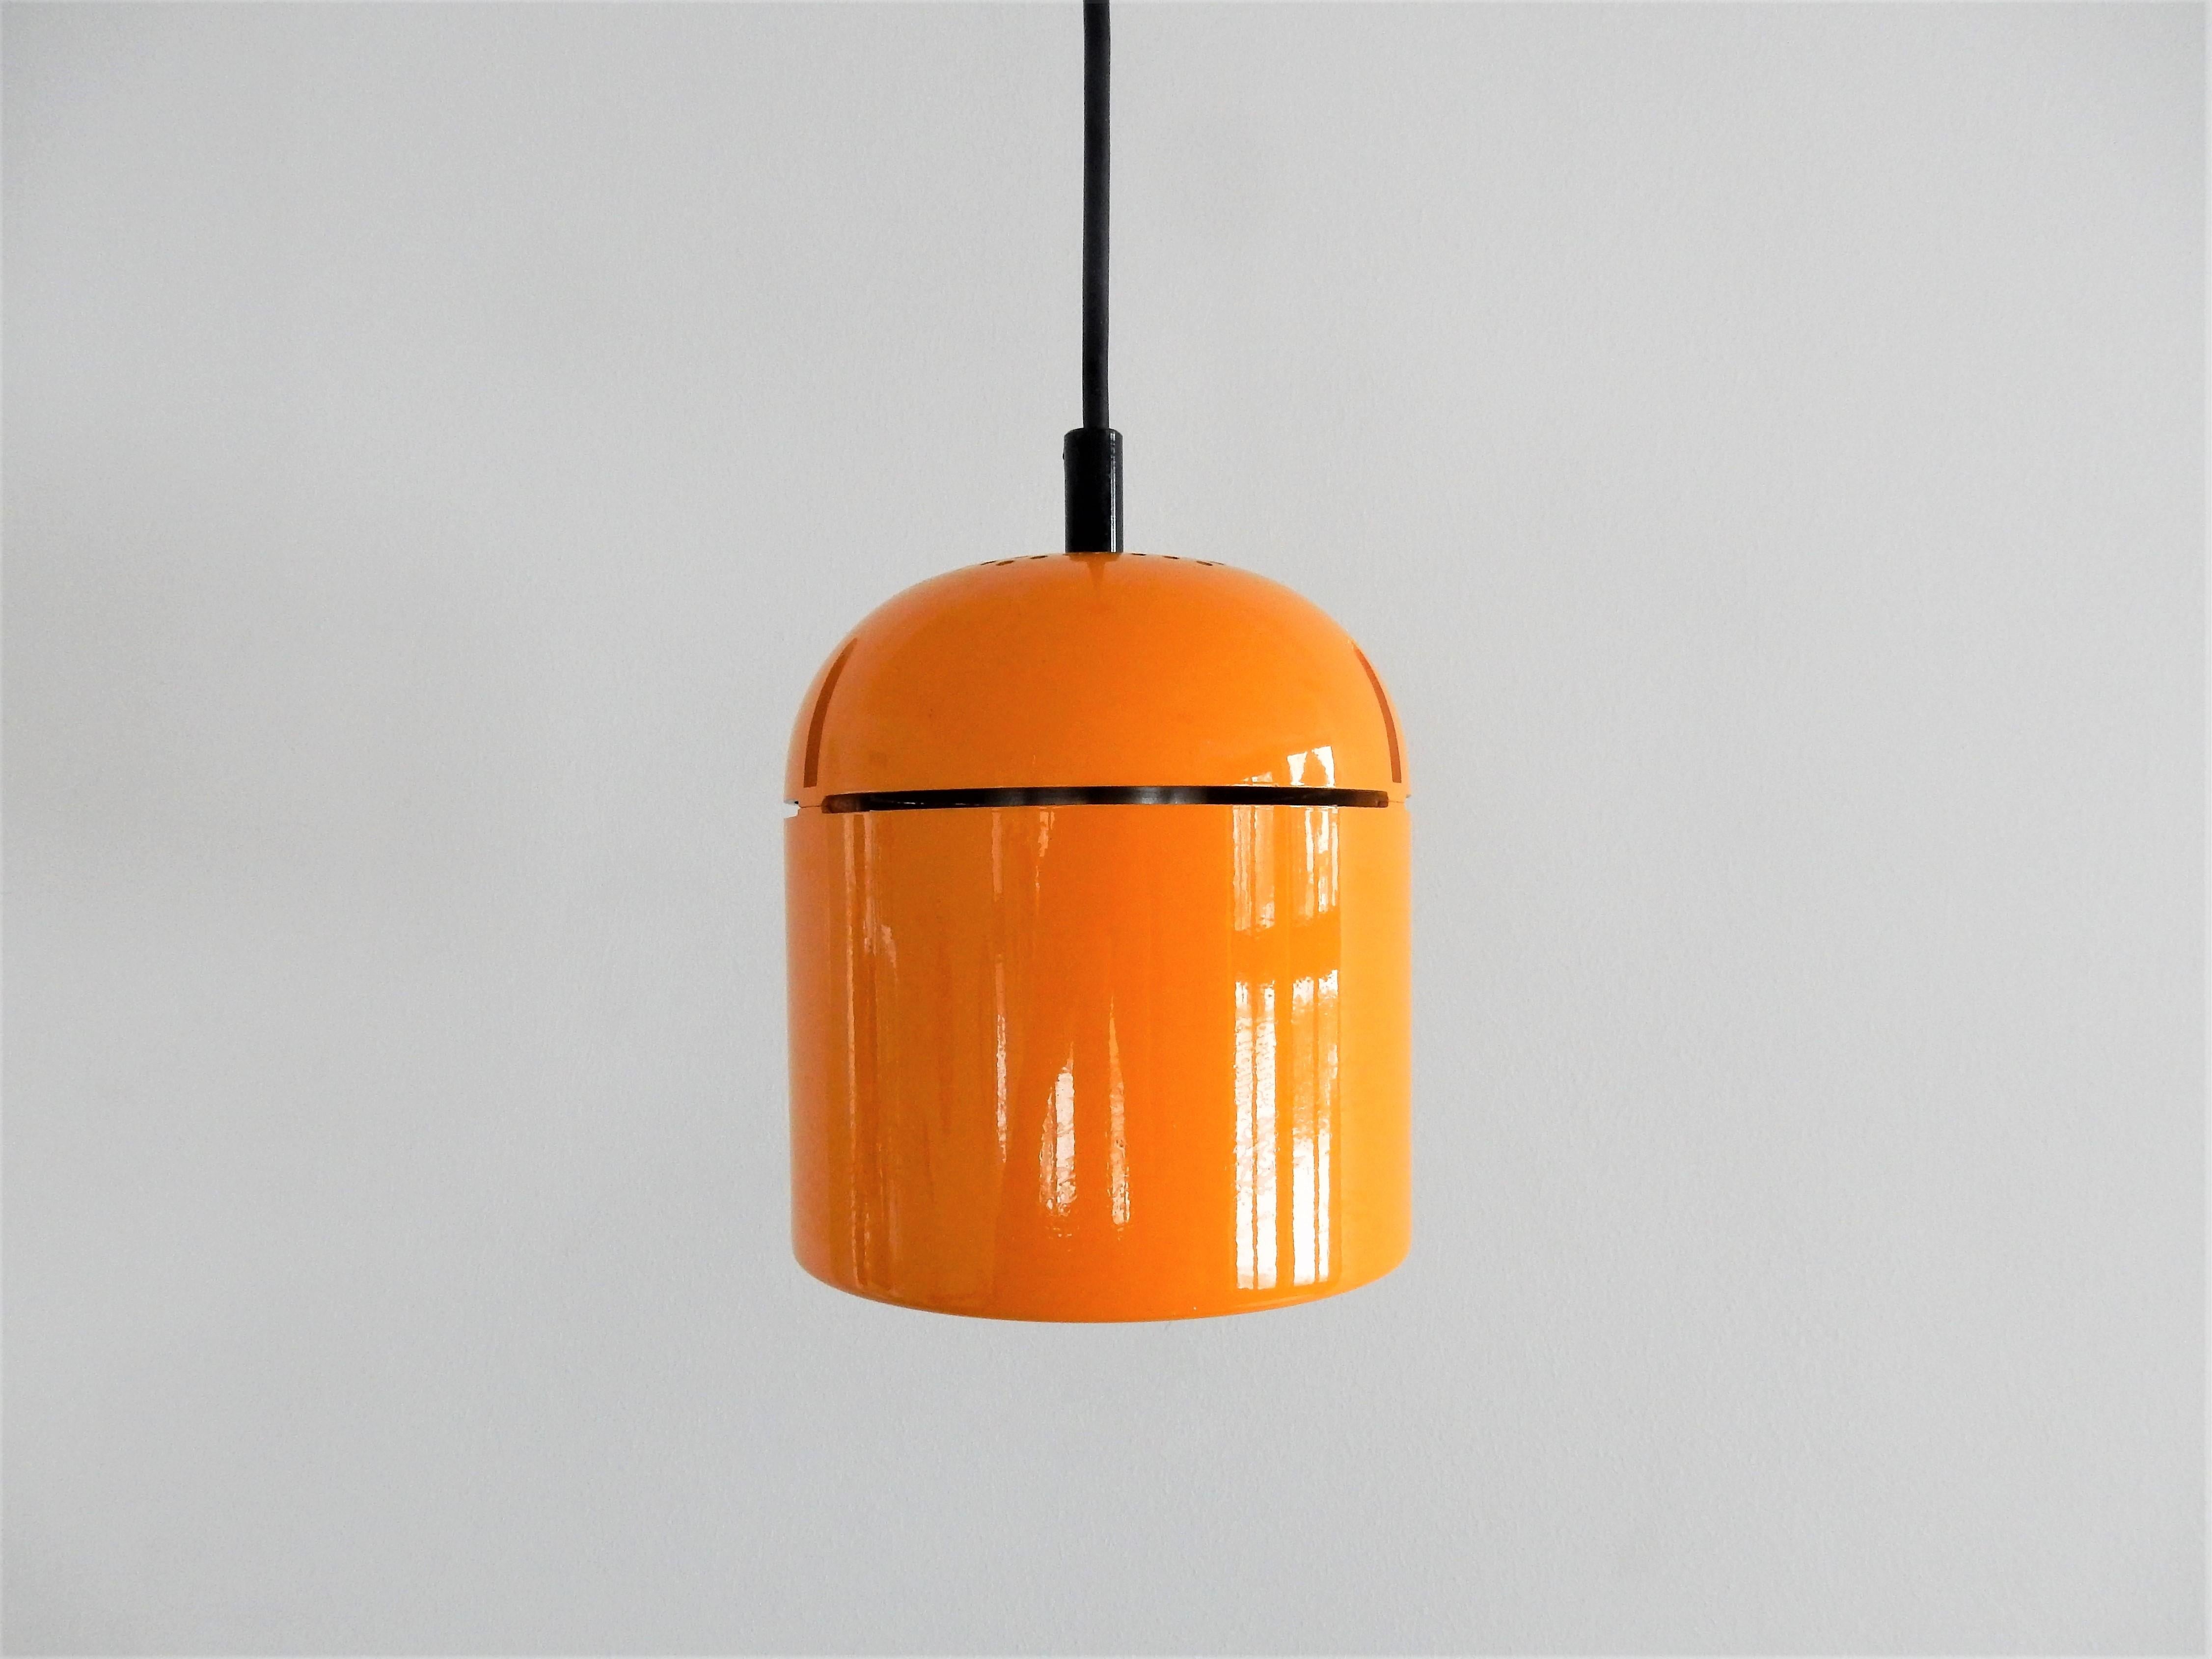 This set of spotlight and pendant lamp was designed by Arnold Berges for Staff Leuchten in Germany in the 1970s. A stunning design that won the iF Product Design Award in 1973. The lamps have a tumbular yellow painted thick acrylic lampshade,